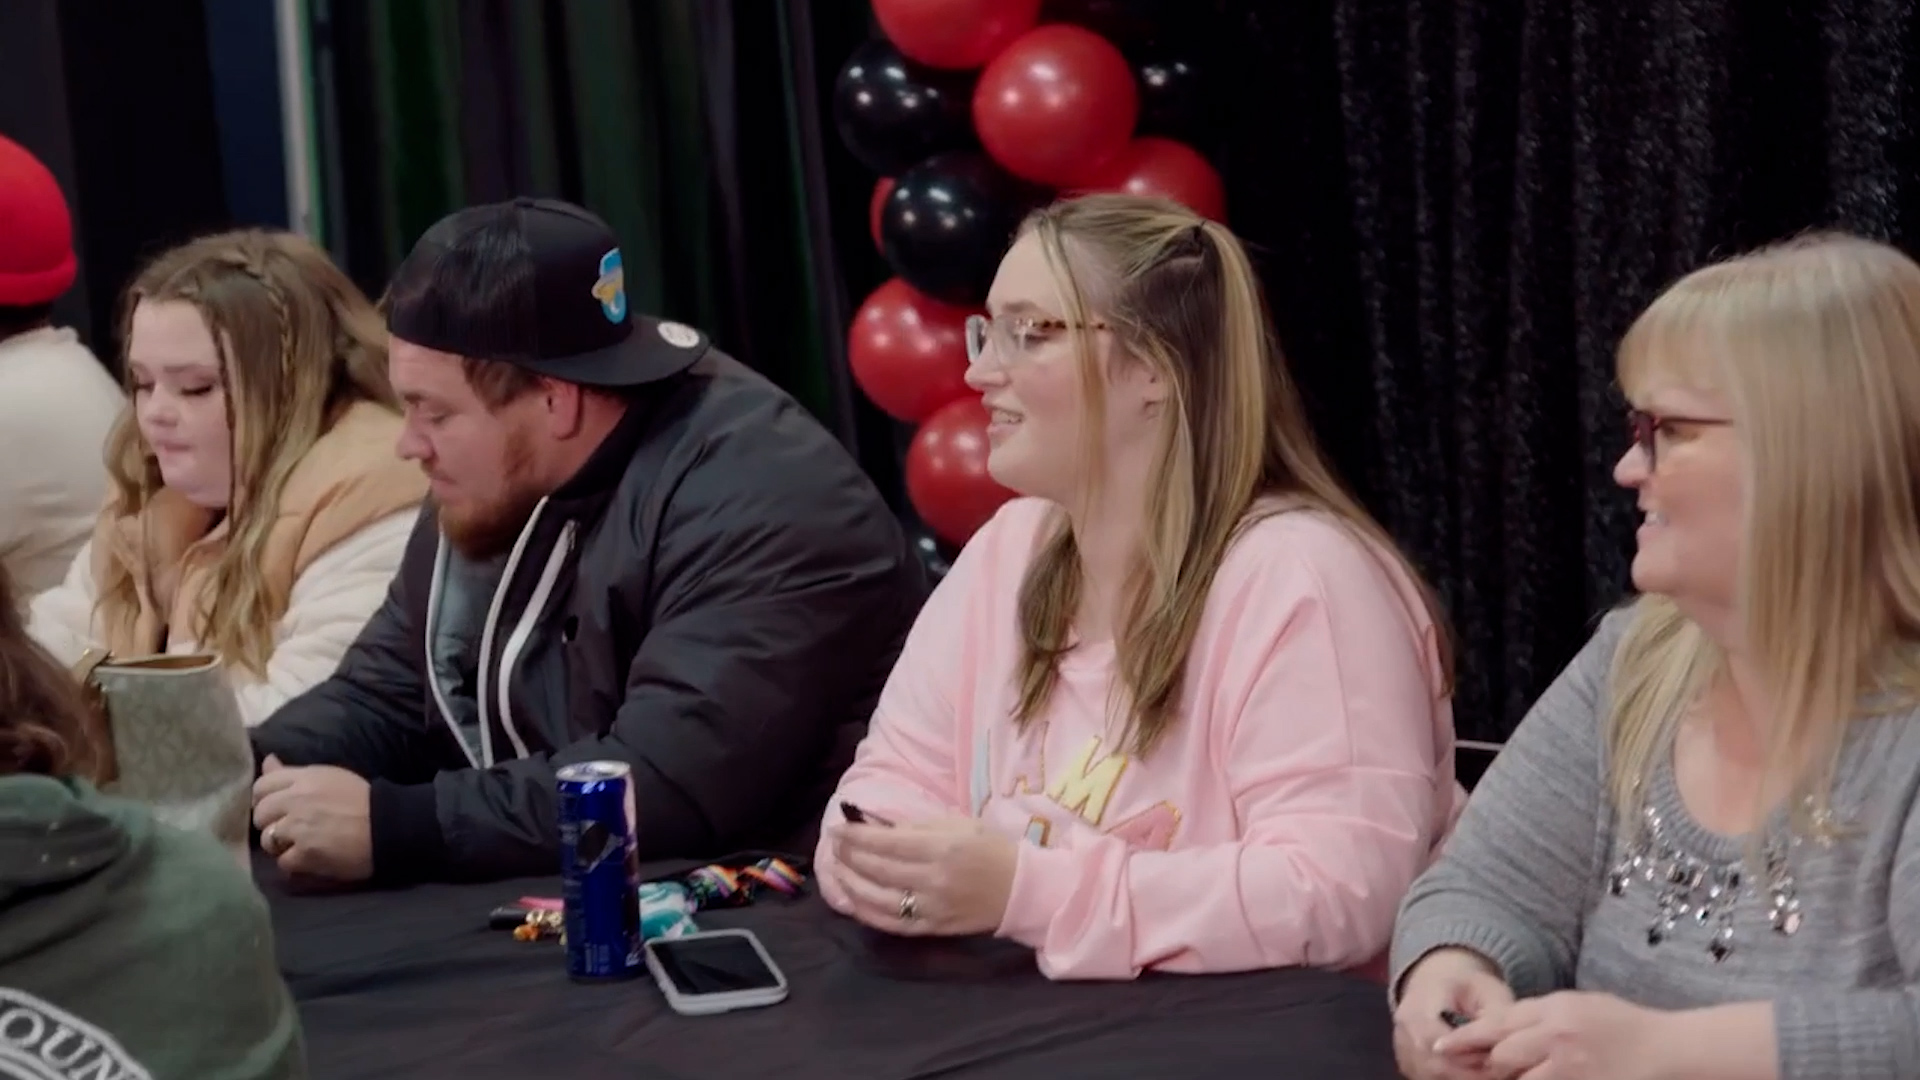 Watch Meet-and-Greet Gone Wrong! | Mama June: From Not to Hot Video Extras